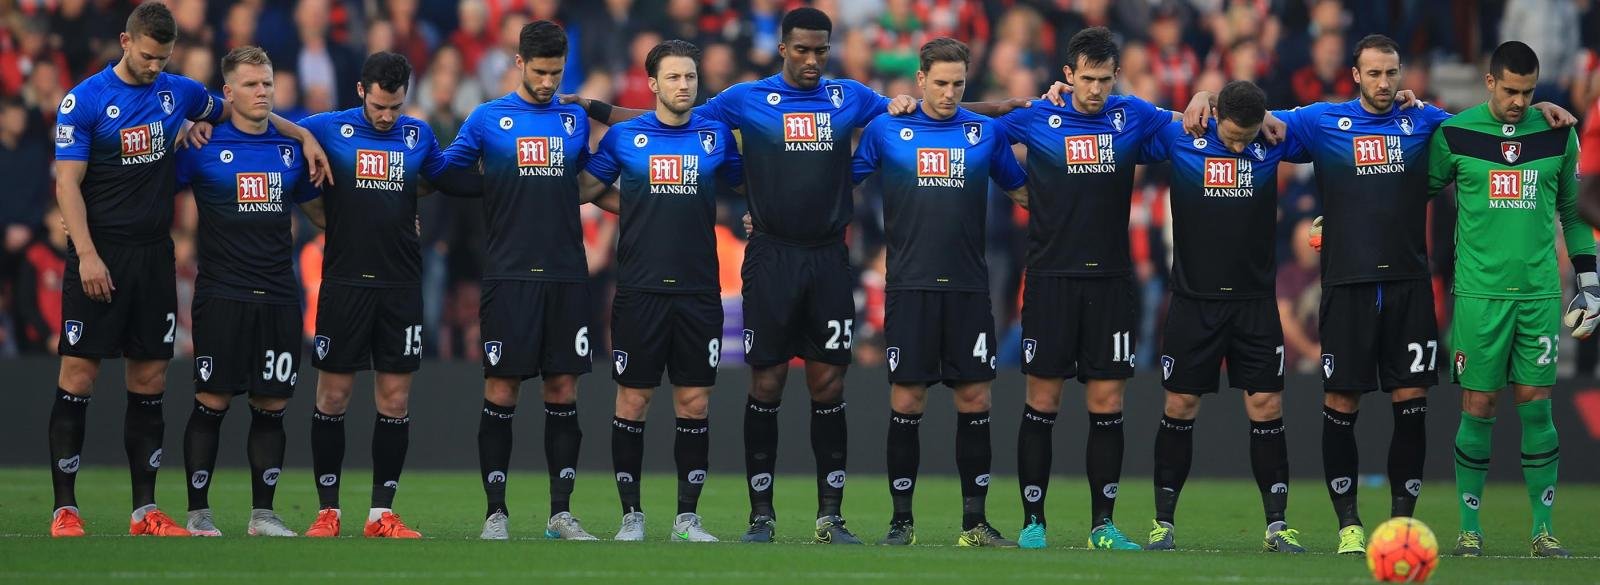 Pass masters will fight it out when Bournemouth face Swansea